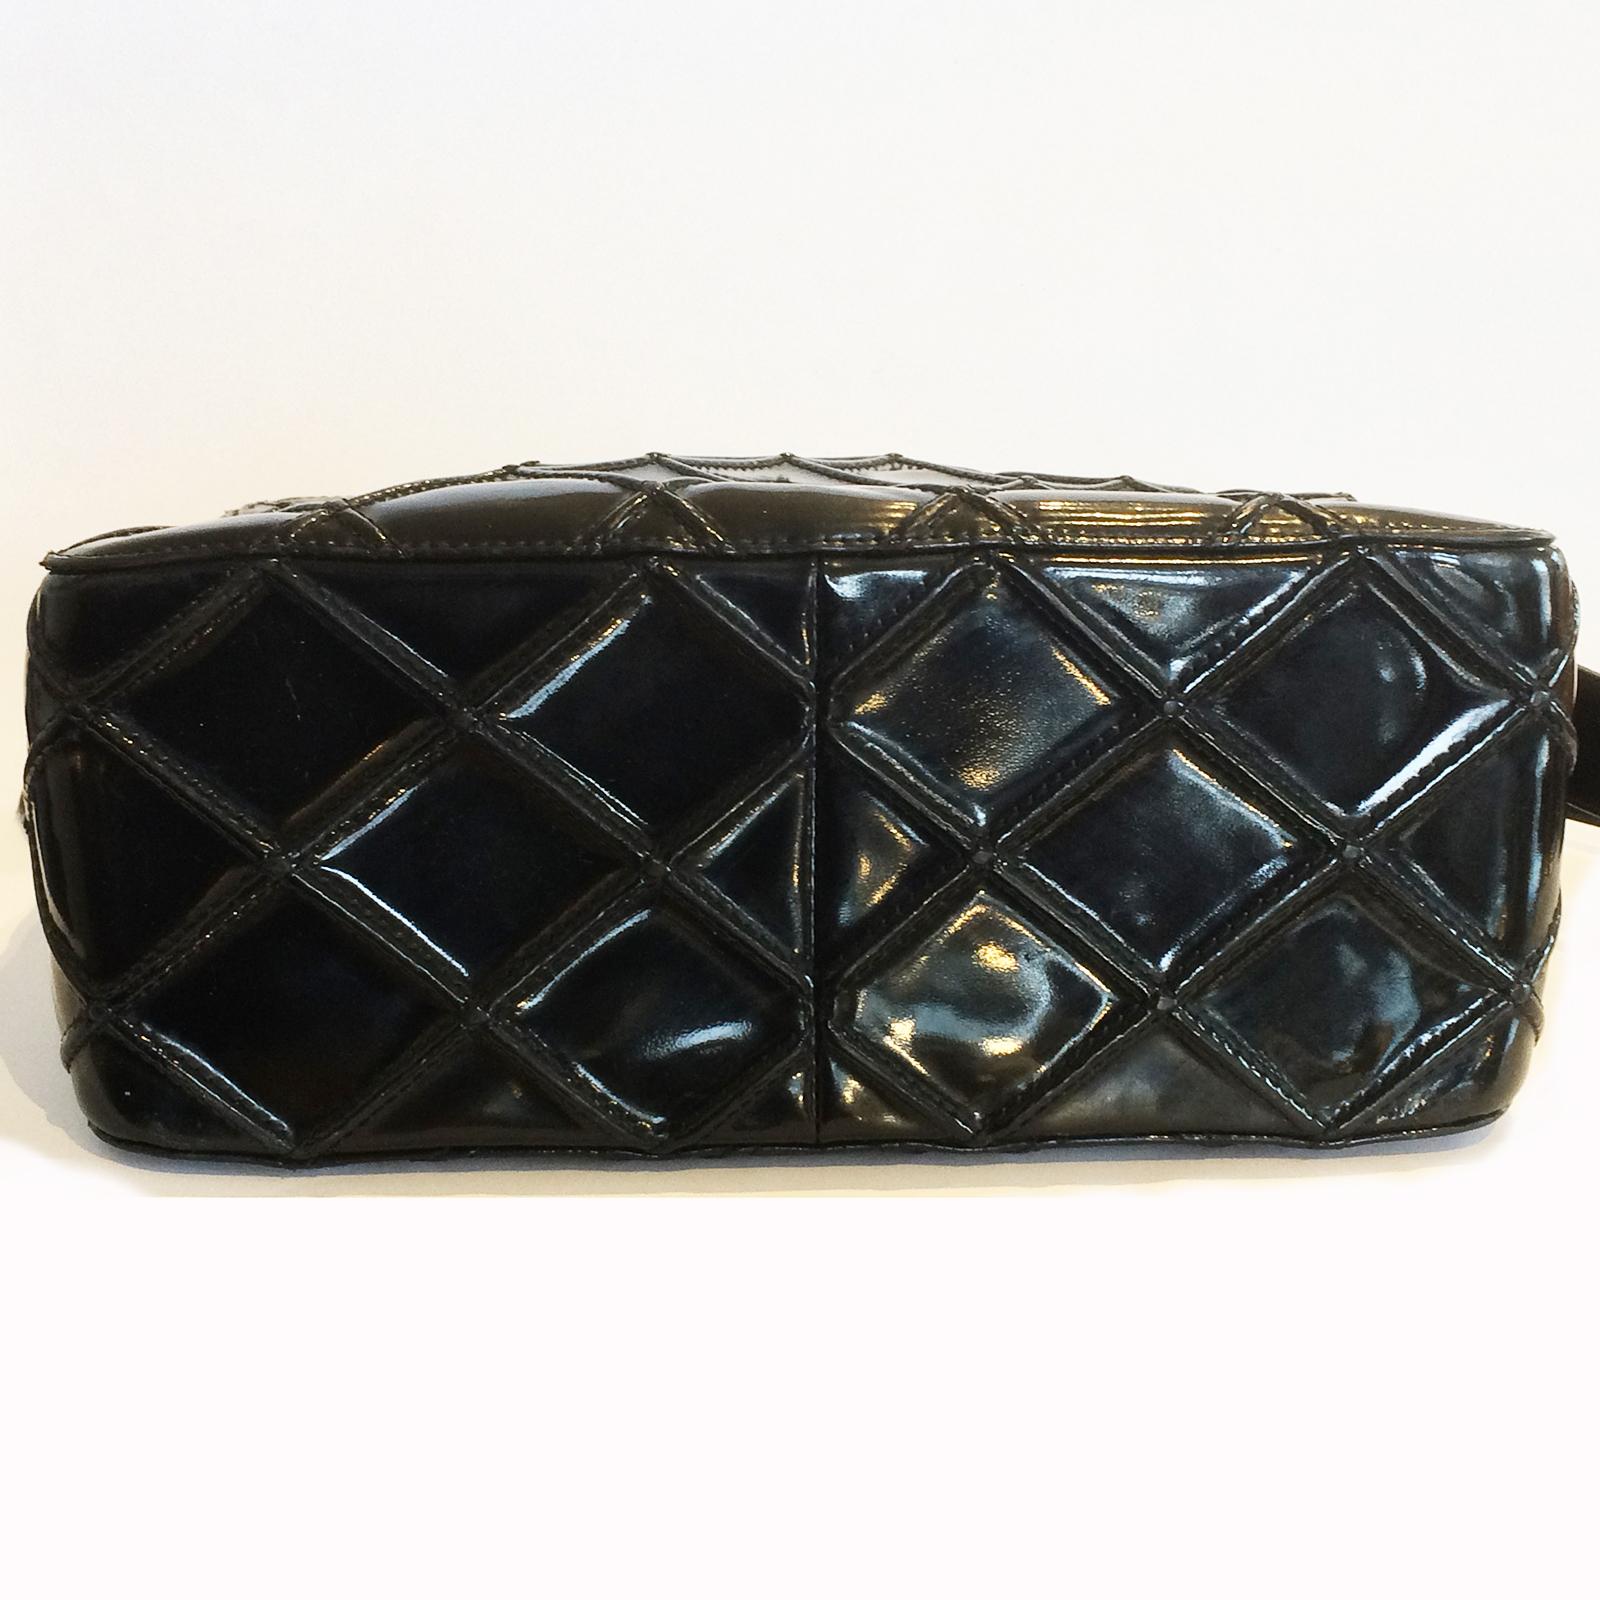 Vintage Authentic Chanel Handbag in Patent Leather, in “V” Stitch or Diamond Pattern, and an external pocket to the front and a “V” stitched outer zipper pull with the silver satin metal “CC” logo. All in amazing, as new condition inside and out,